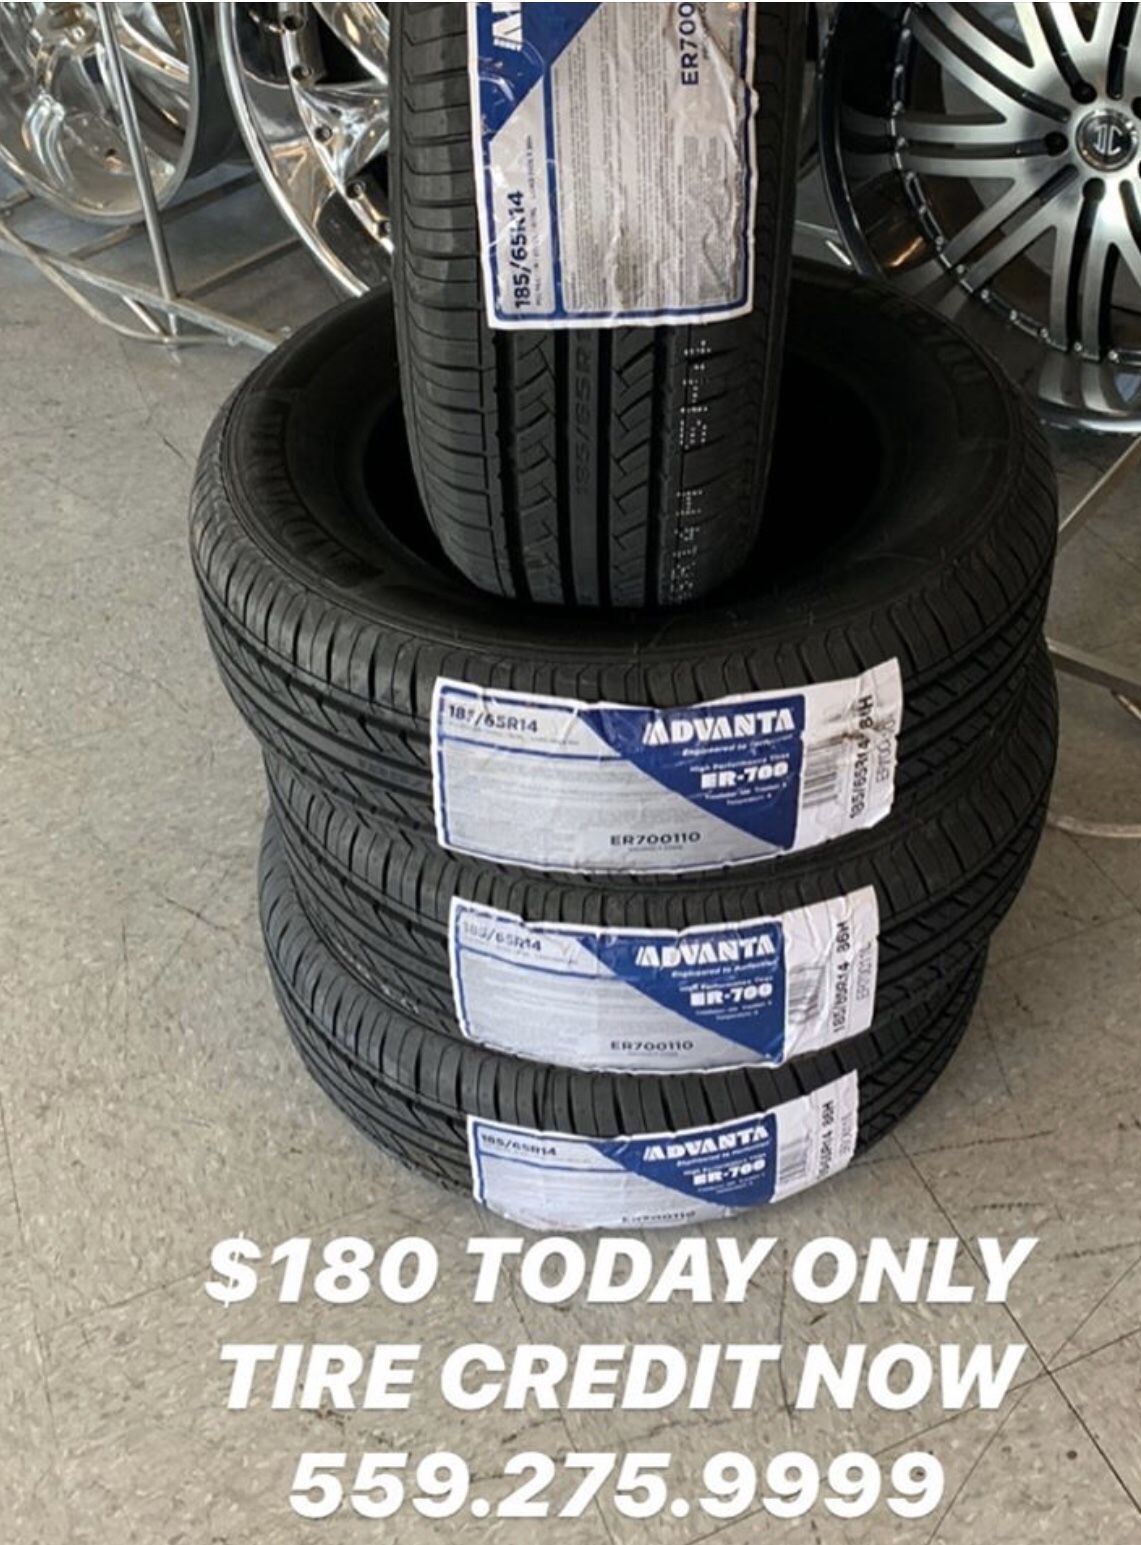 Today only carrry out 185-65-14 new tires